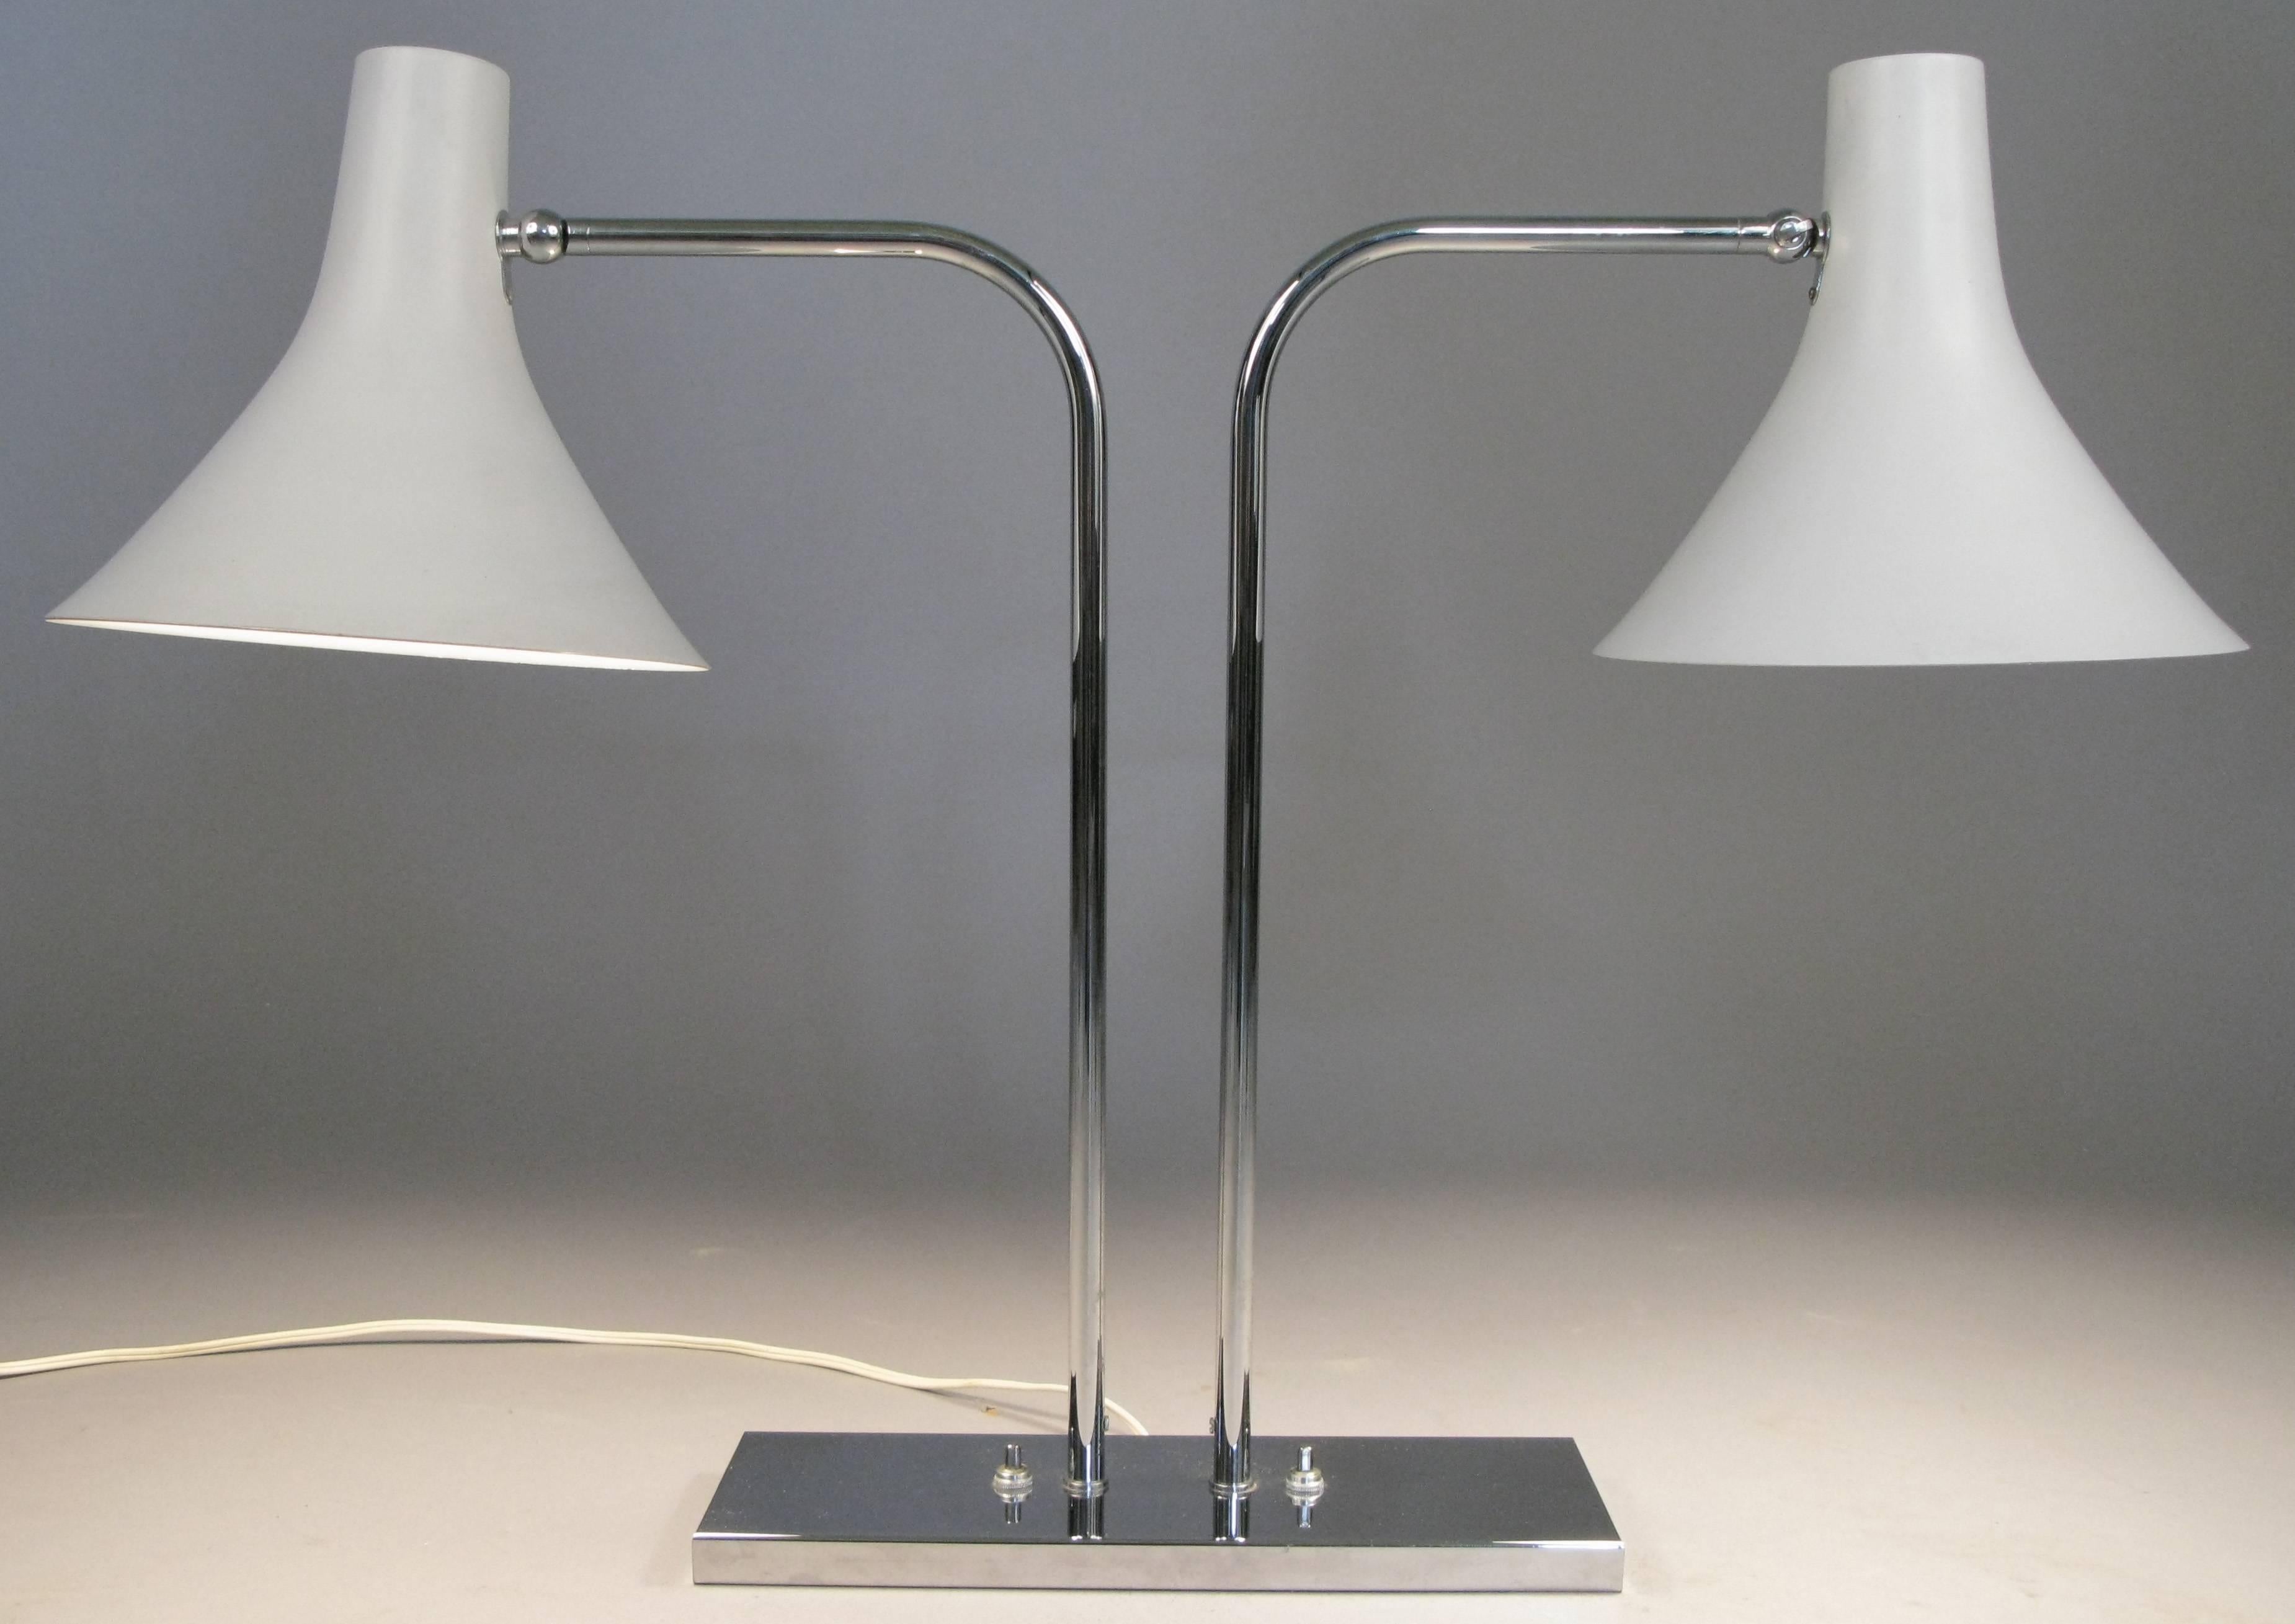 A very nice example of this versatile Mid-Century Modern table or desk lamp by Nessen. With a perfect chrome finish, each lamp is operated separately and can be tilted or swiveled allowing for a wide variety of uses and applications. Mint condition.